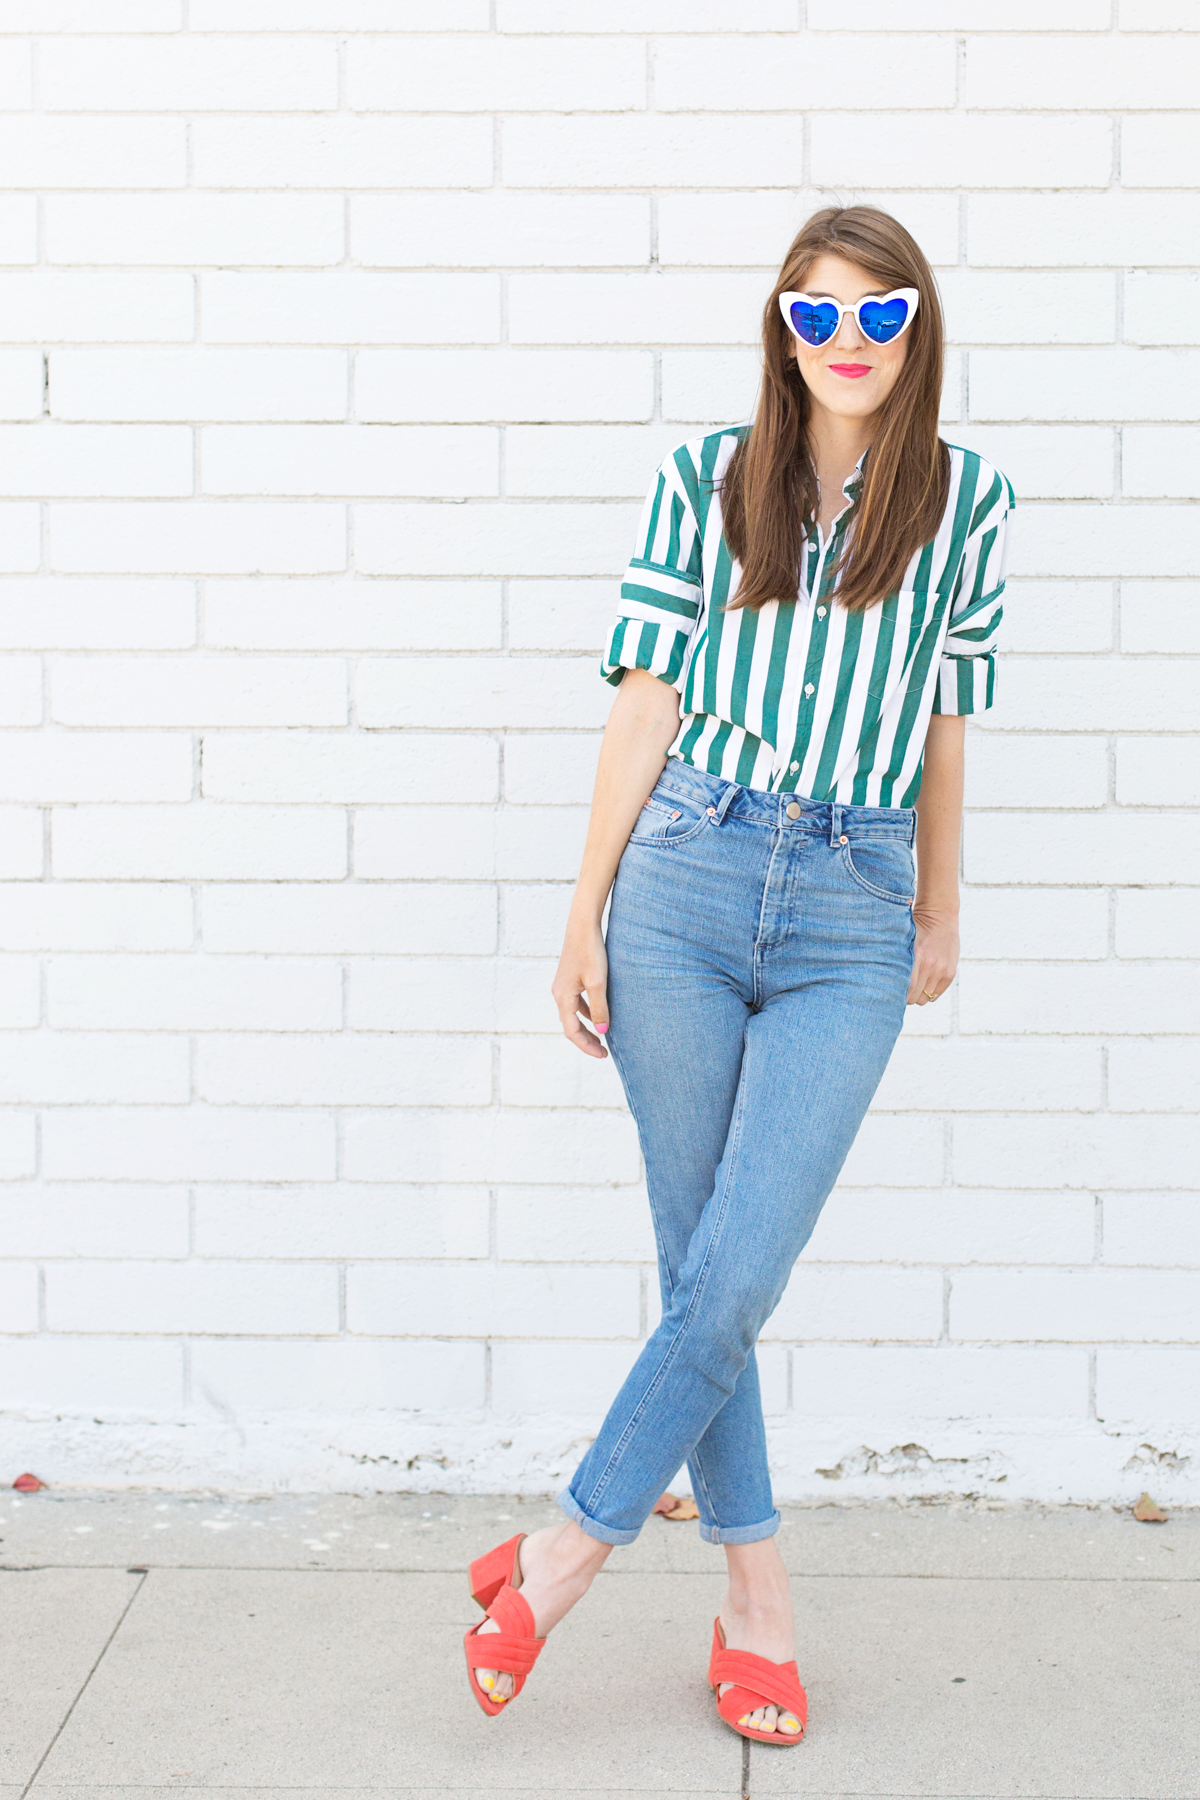 Seven Ways To Wear A Button Down Outside the Office - Studio DIY